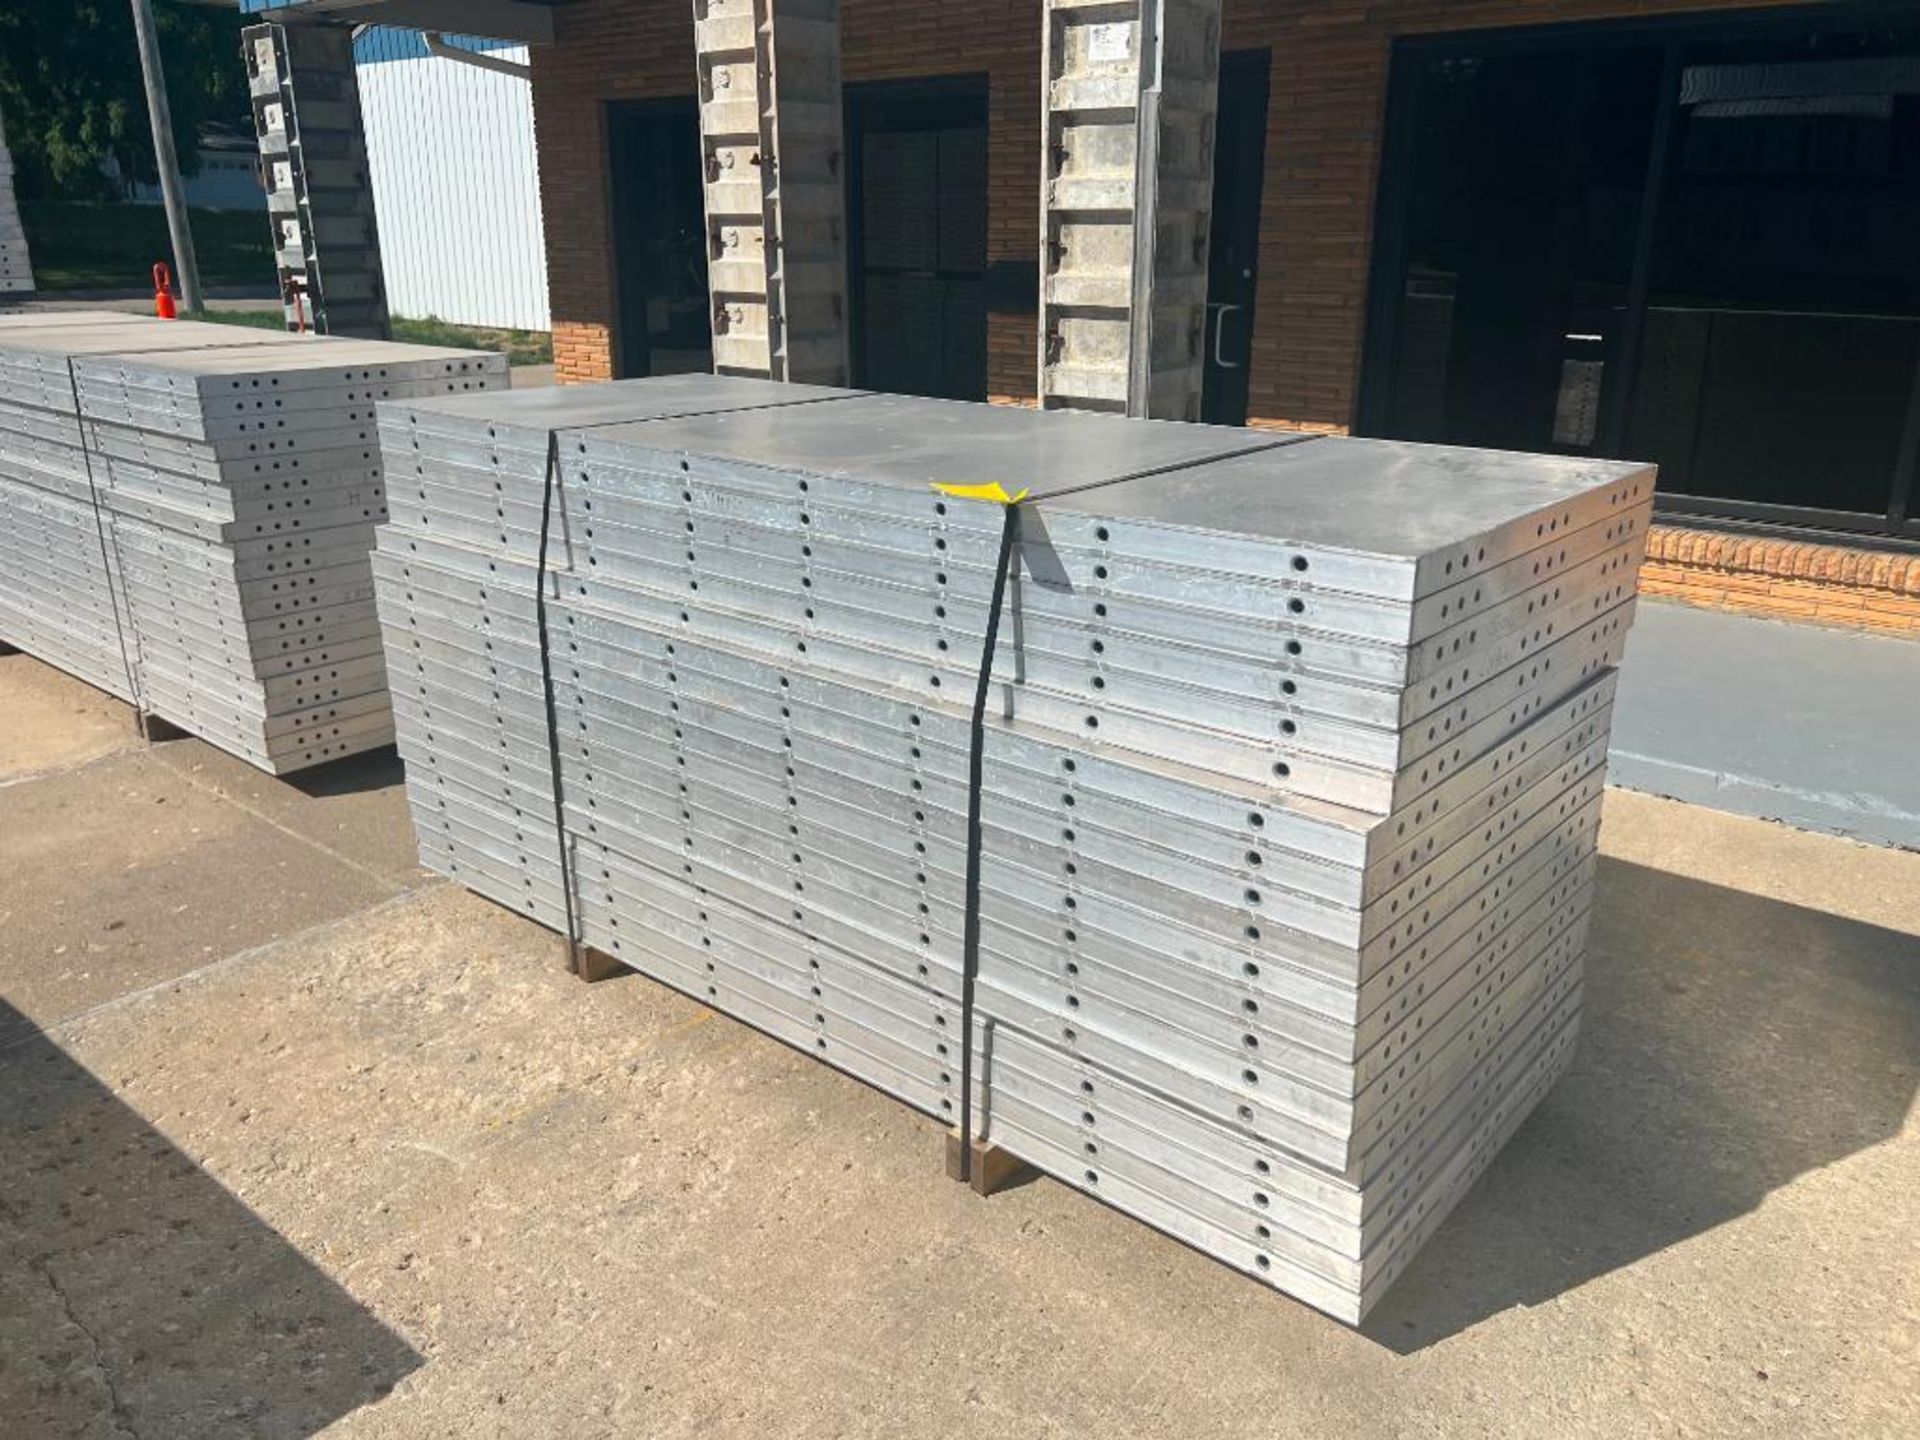 (20) NEW 3' x 8' Wall Ties Aluminum Concrete Forms, 6-12 Hole Pattern. Located in Mt. Pleasant, IA